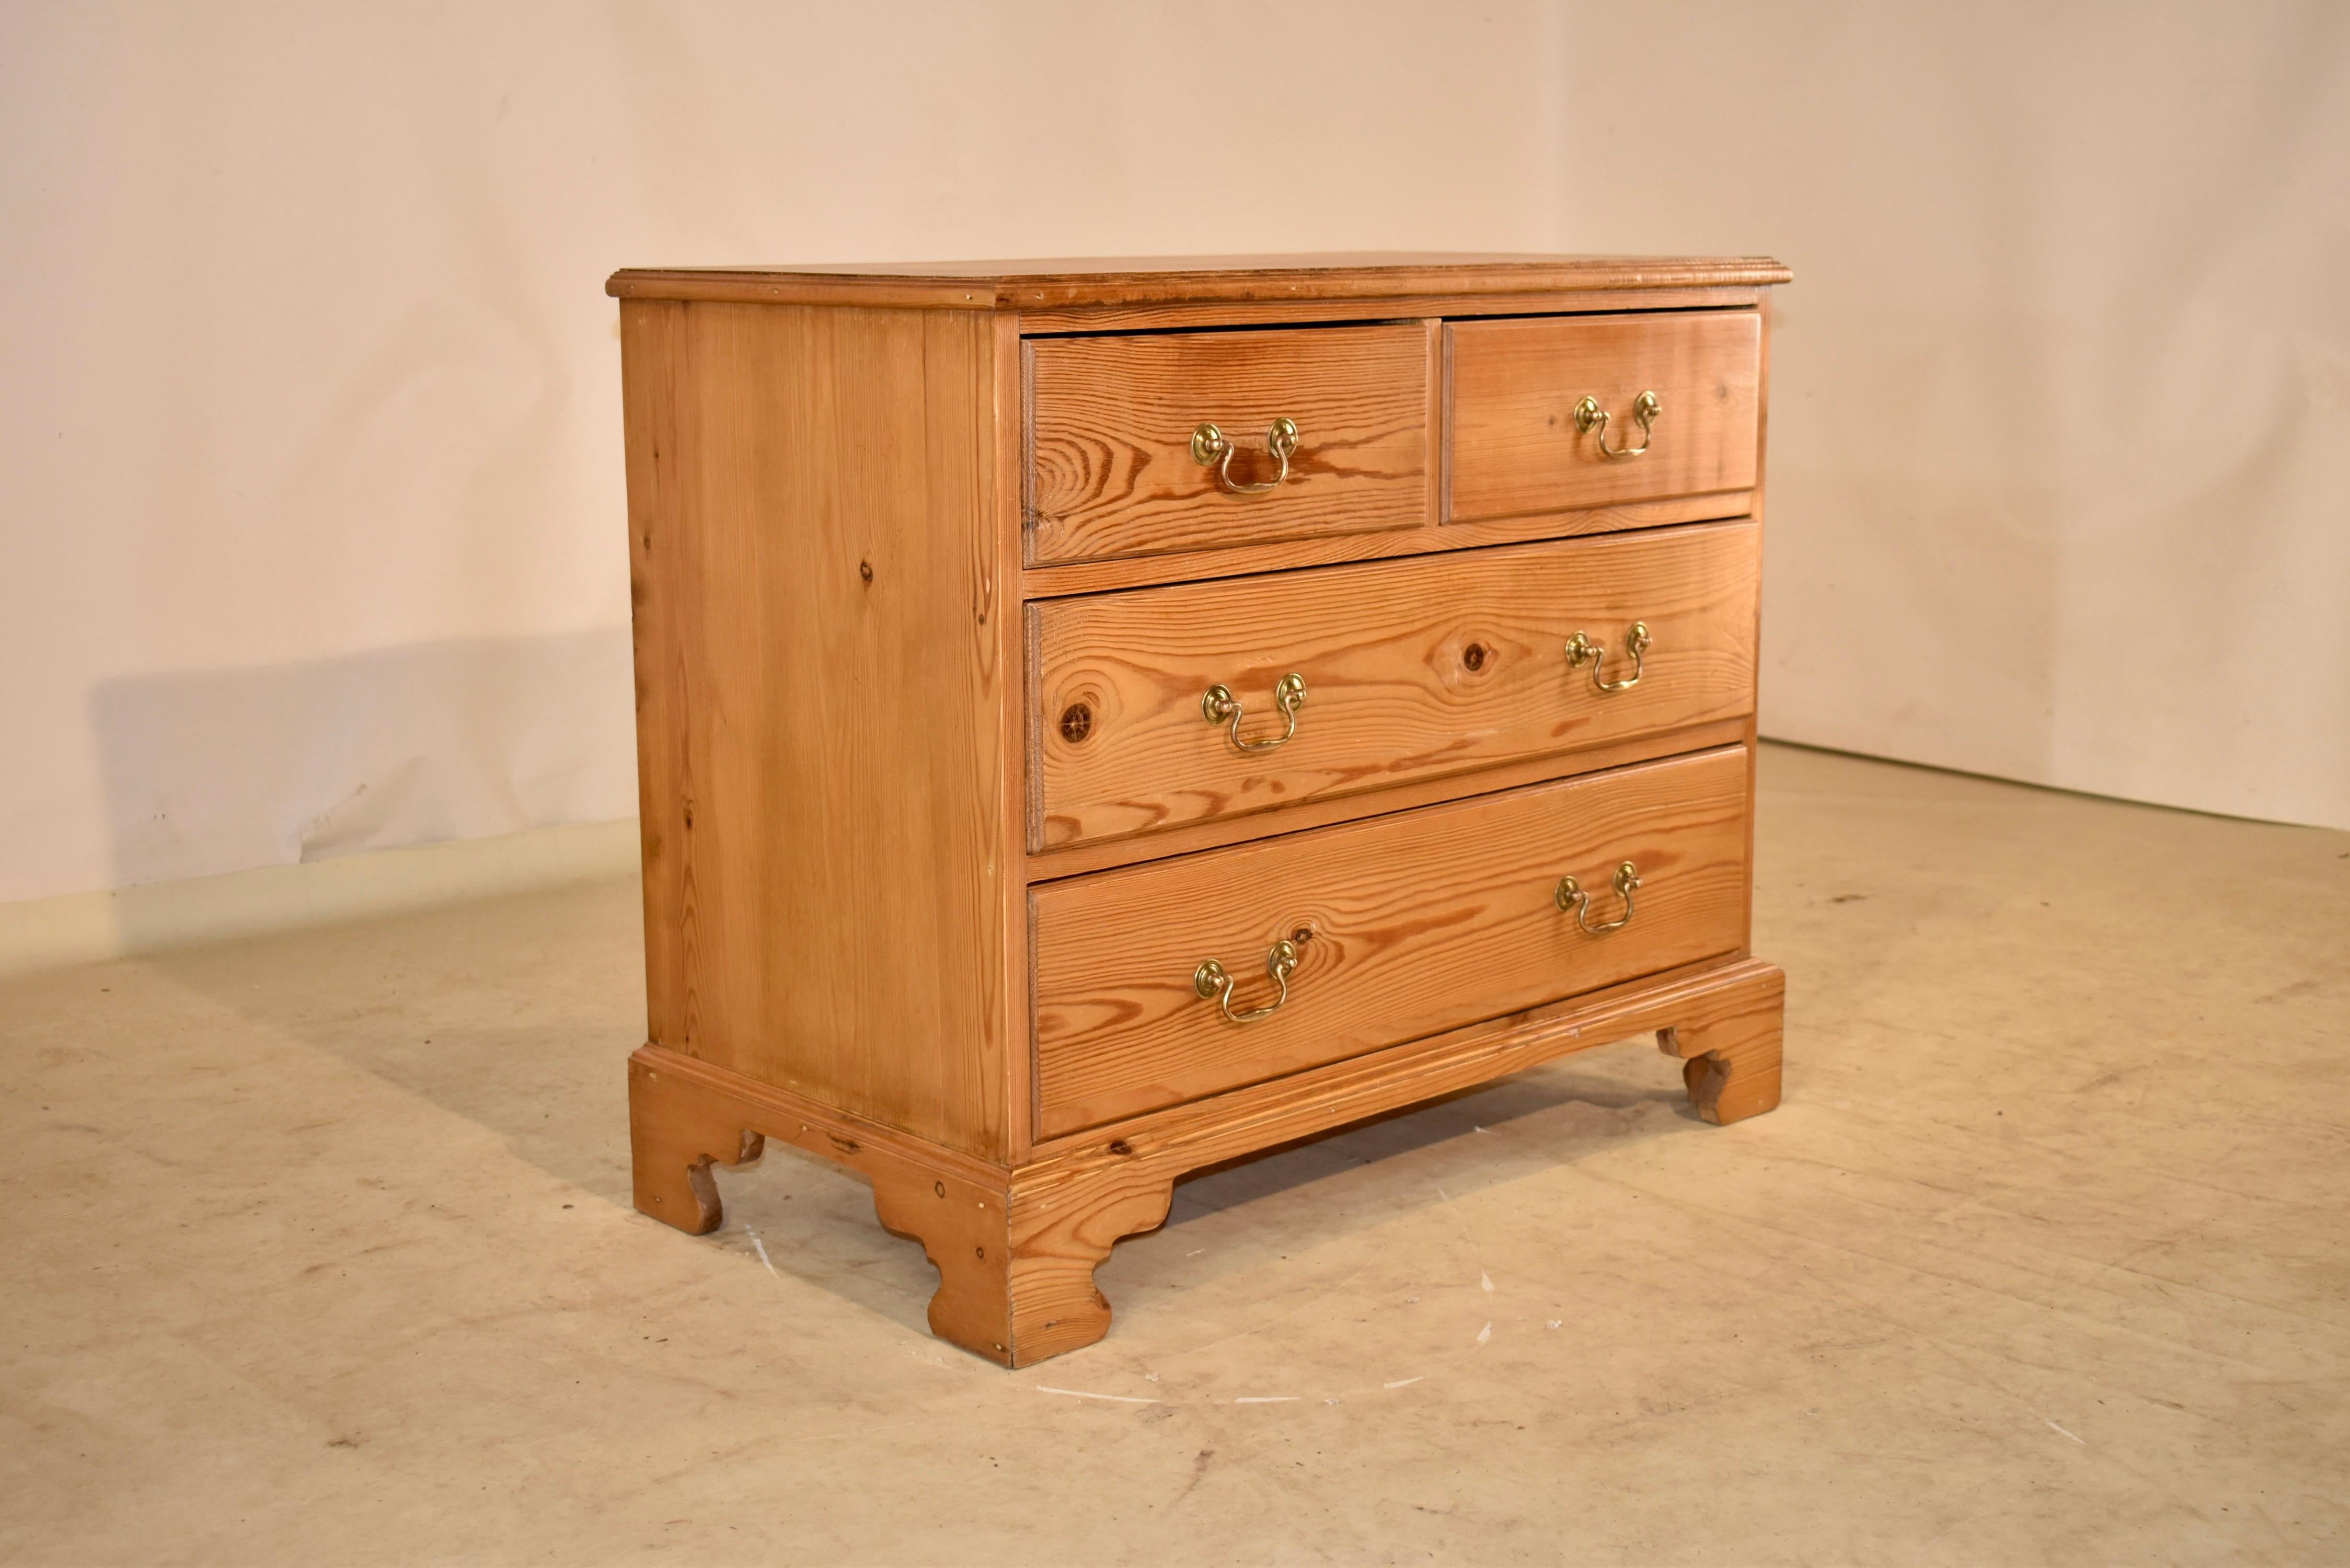 Mid-20th century pine chest of drawers from England with a beveled edge around the top, following down to simple sides and two drawers over two drawers in the front. The drawer fronts are all made from lovely grained single boards. The bottom of the